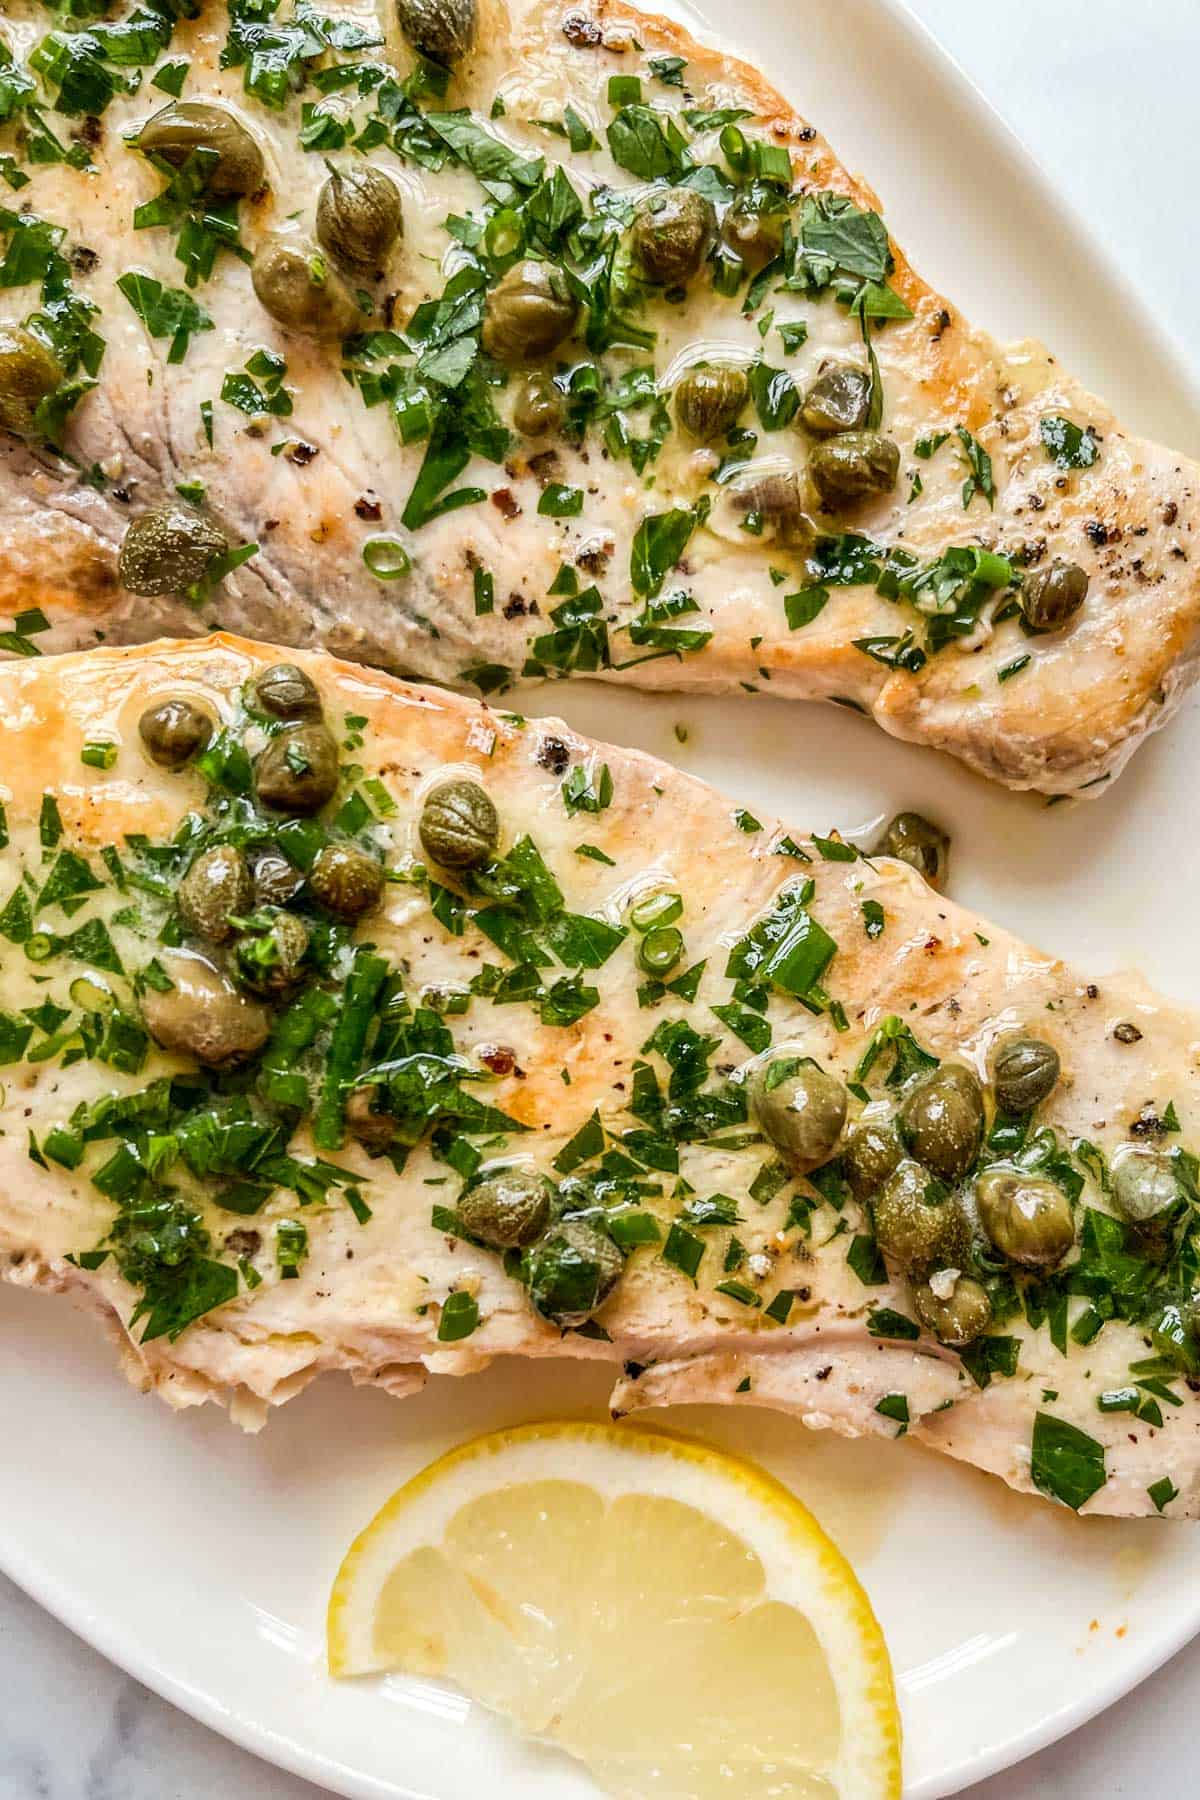 Two swordfish steaks with a herb butter caper sauce on a white platter.